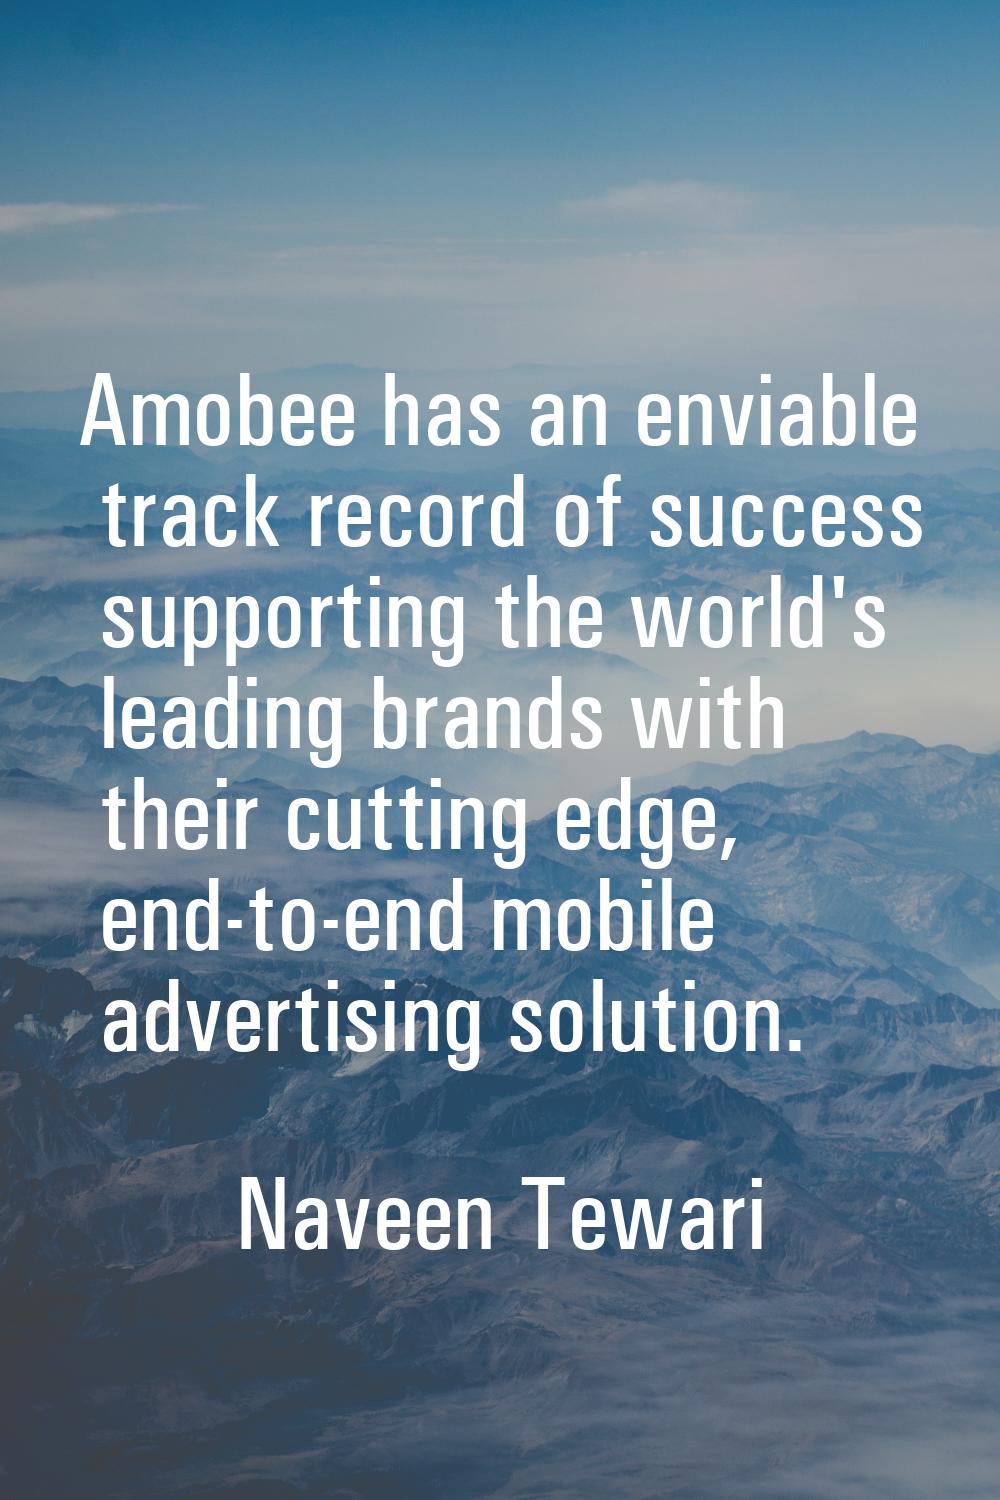 Amobee has an enviable track record of success supporting the world's leading brands with their cut